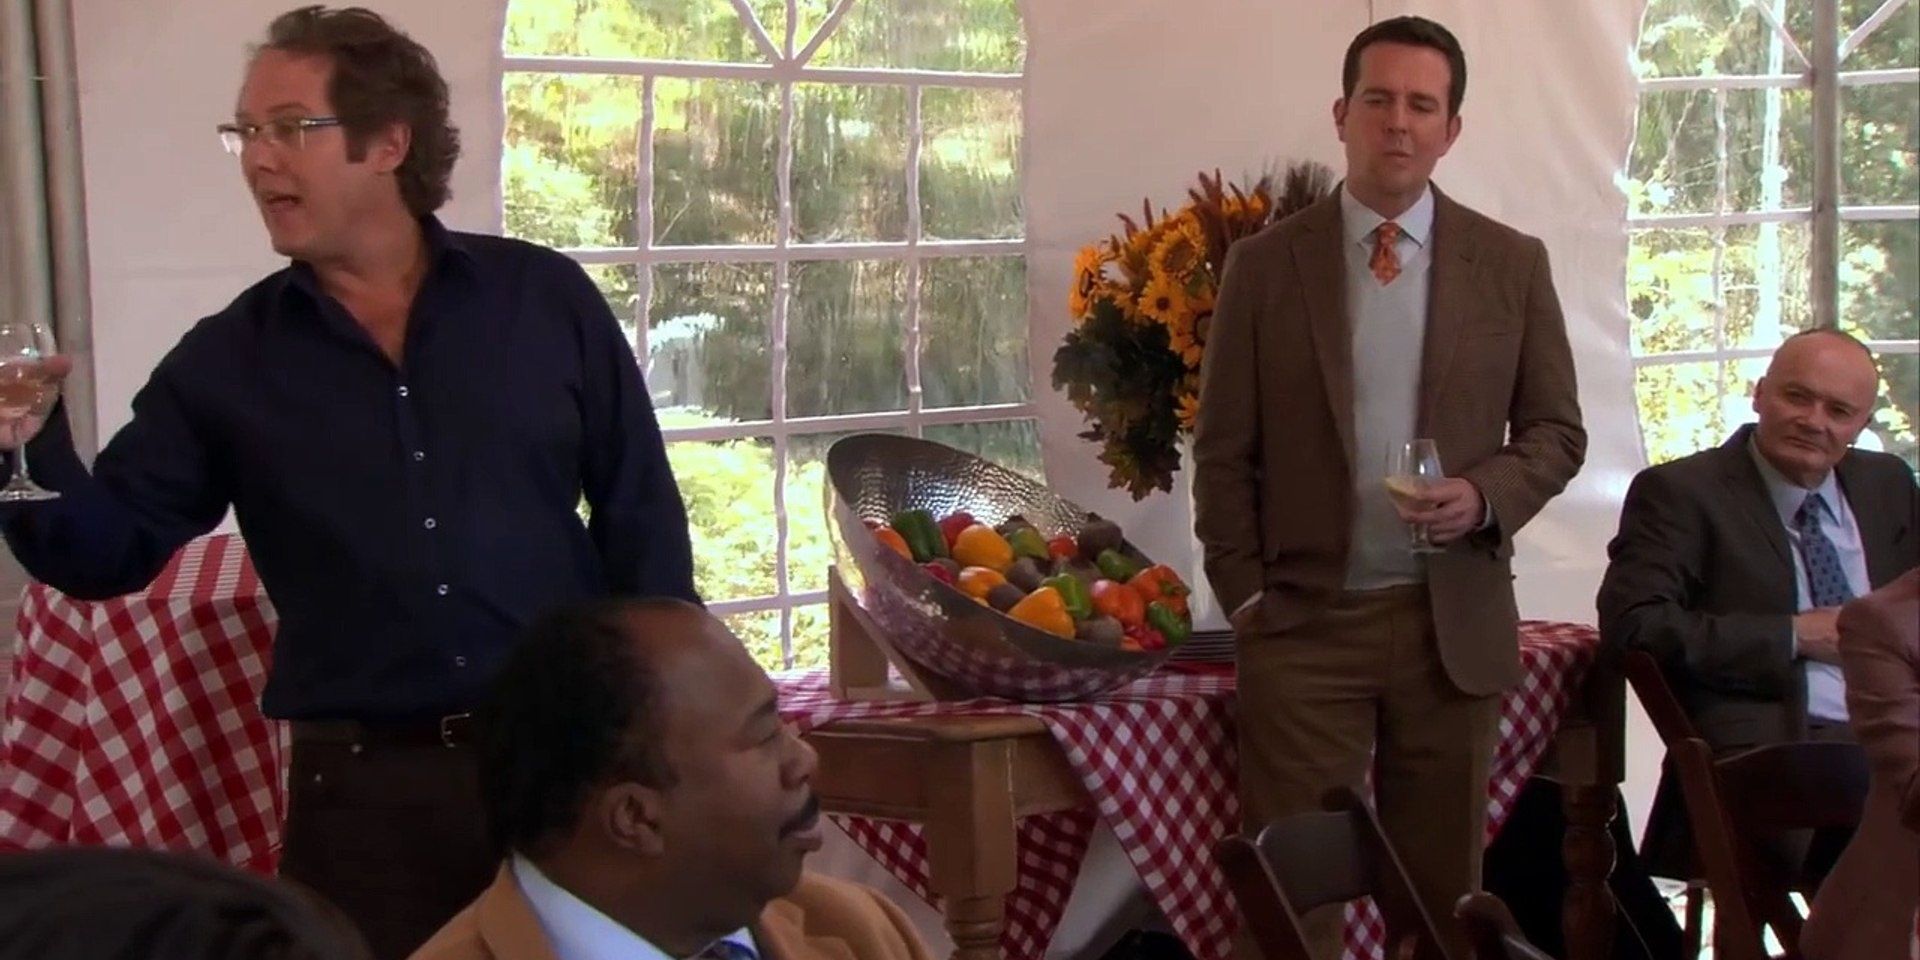 Robert California gives a speech at Andy's Garden Party on The Office